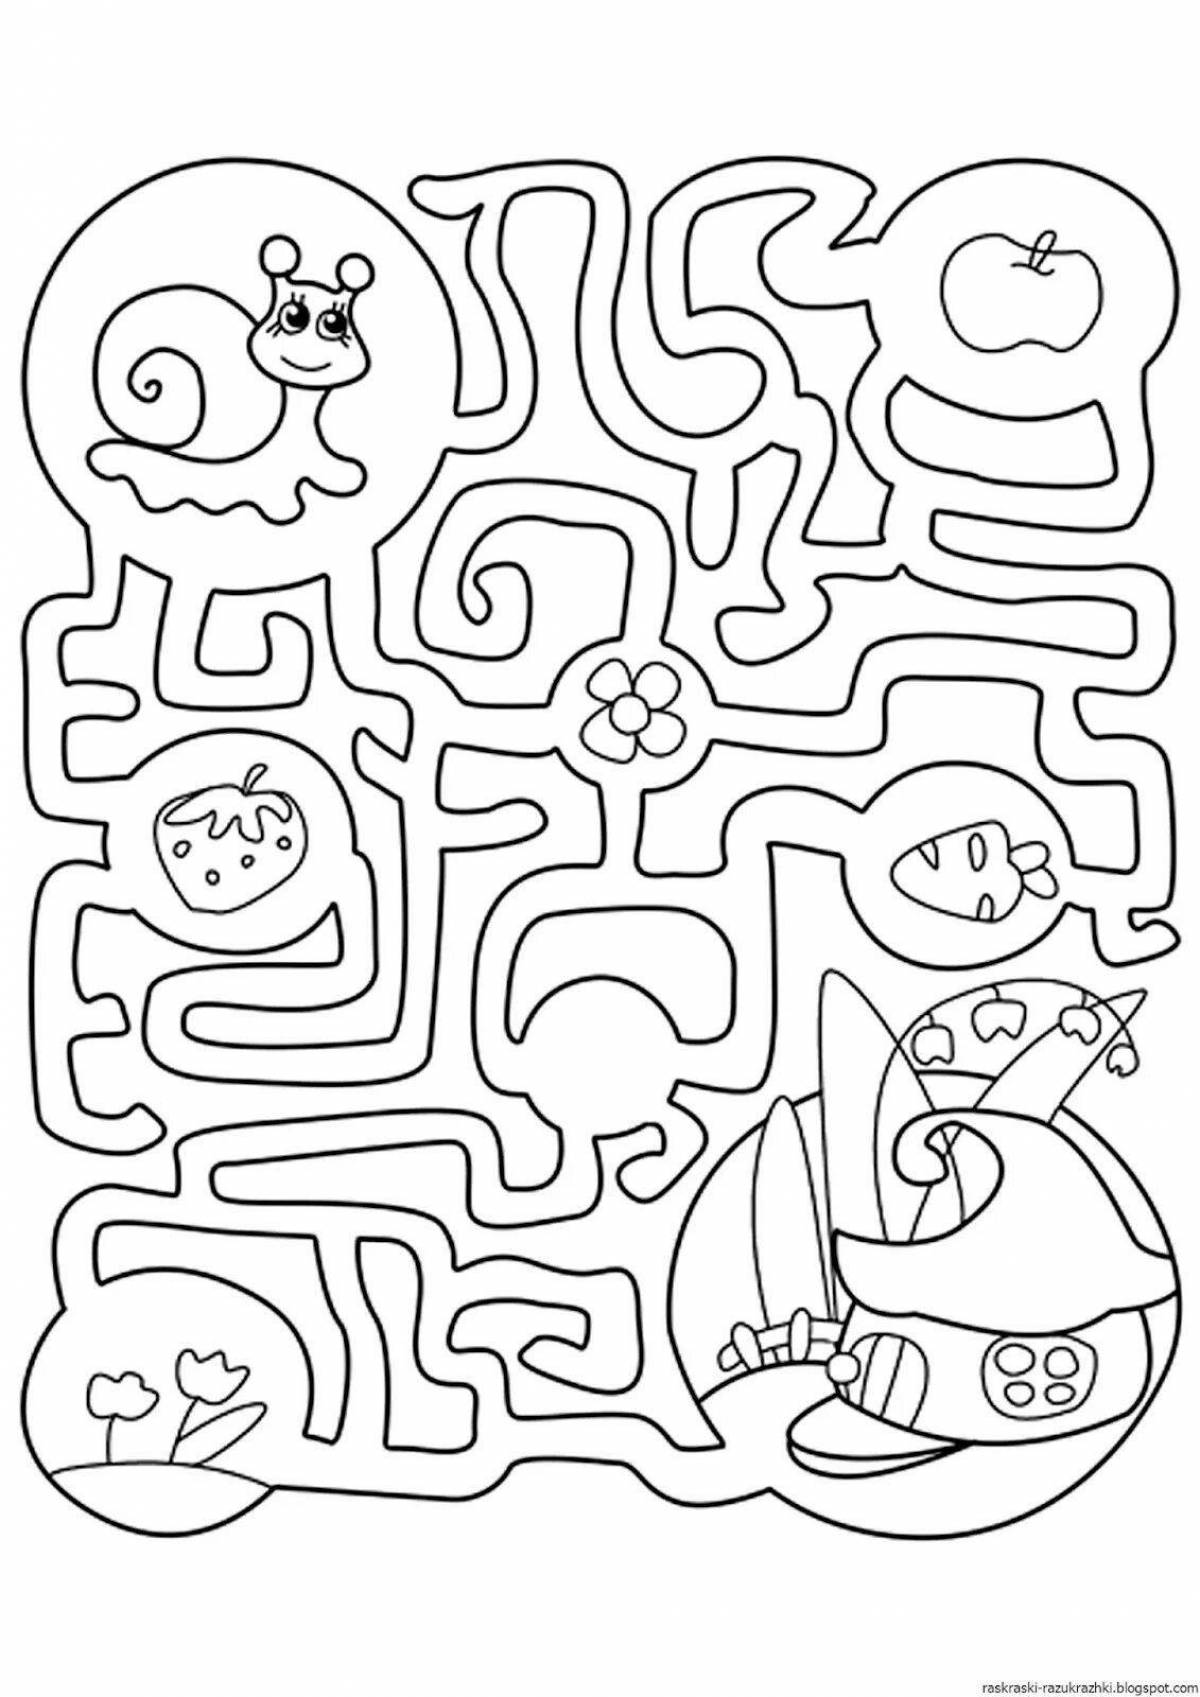 Amazing coloring maze for 7 year olds